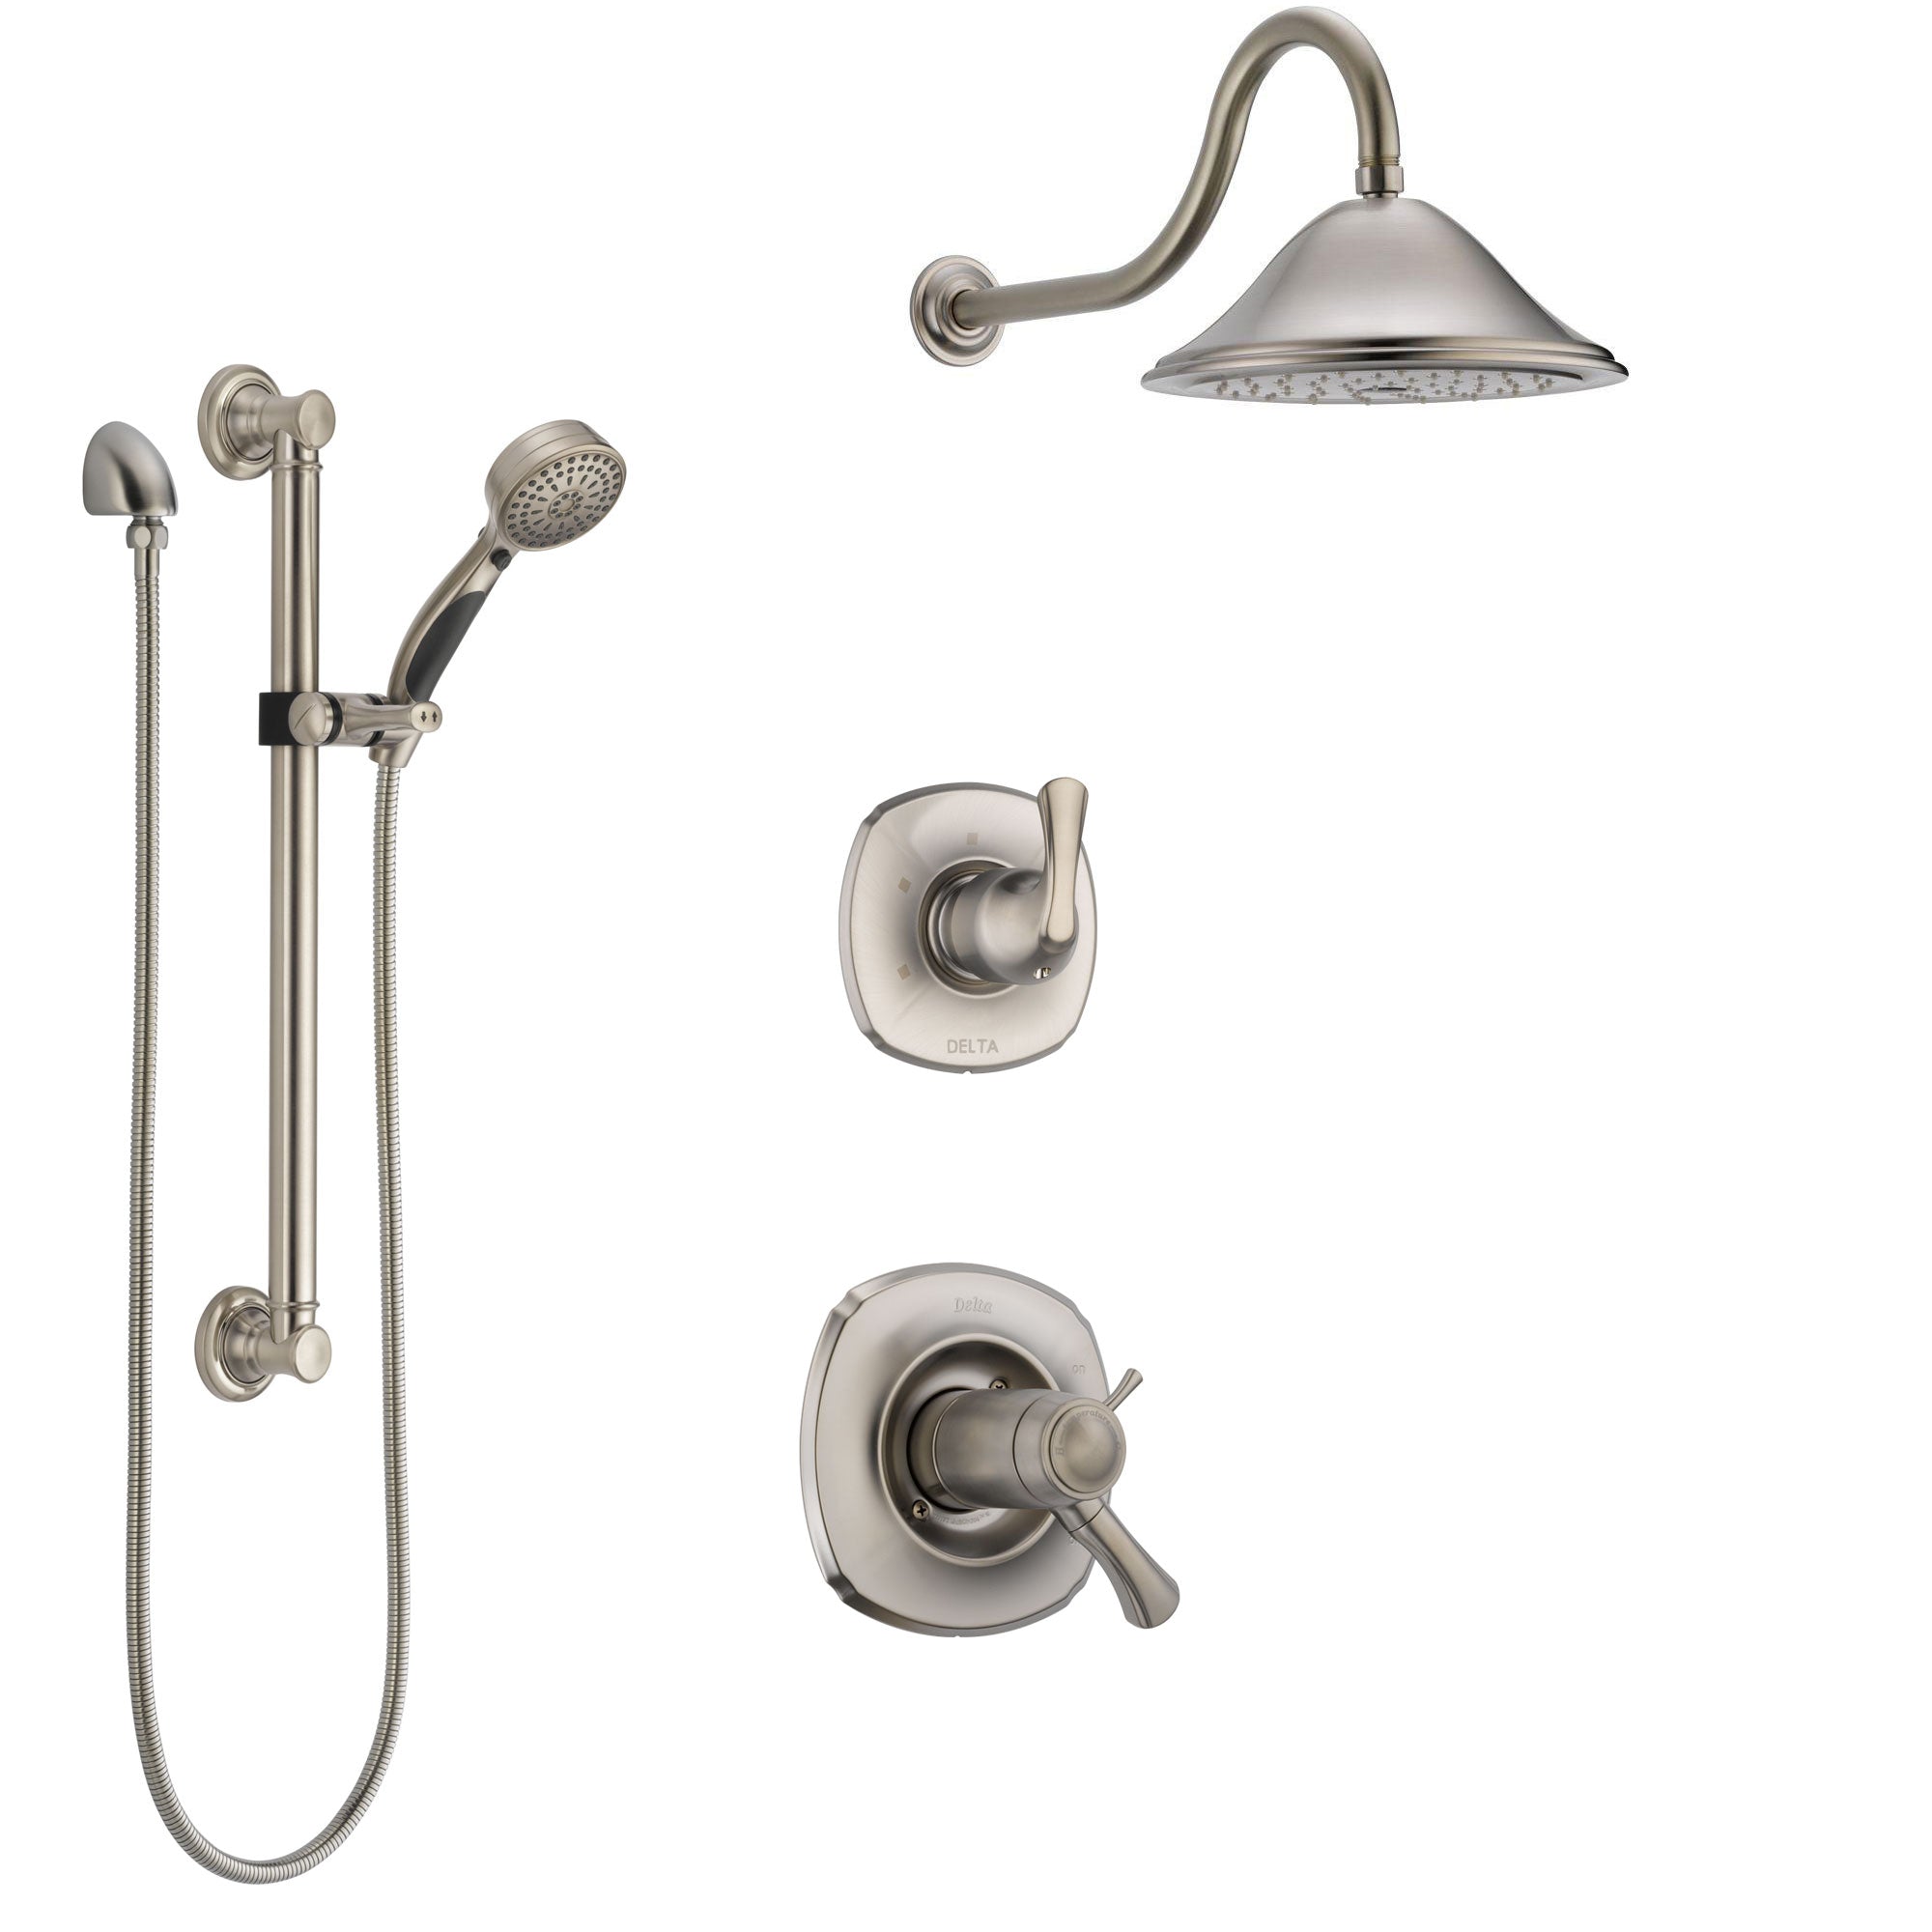 Delta Addison Dual Thermostatic Control Handle Stainless Steel Finish Shower System, Diverter, Showerhead, and Hand Shower with Grab Bar SS17T921SS1